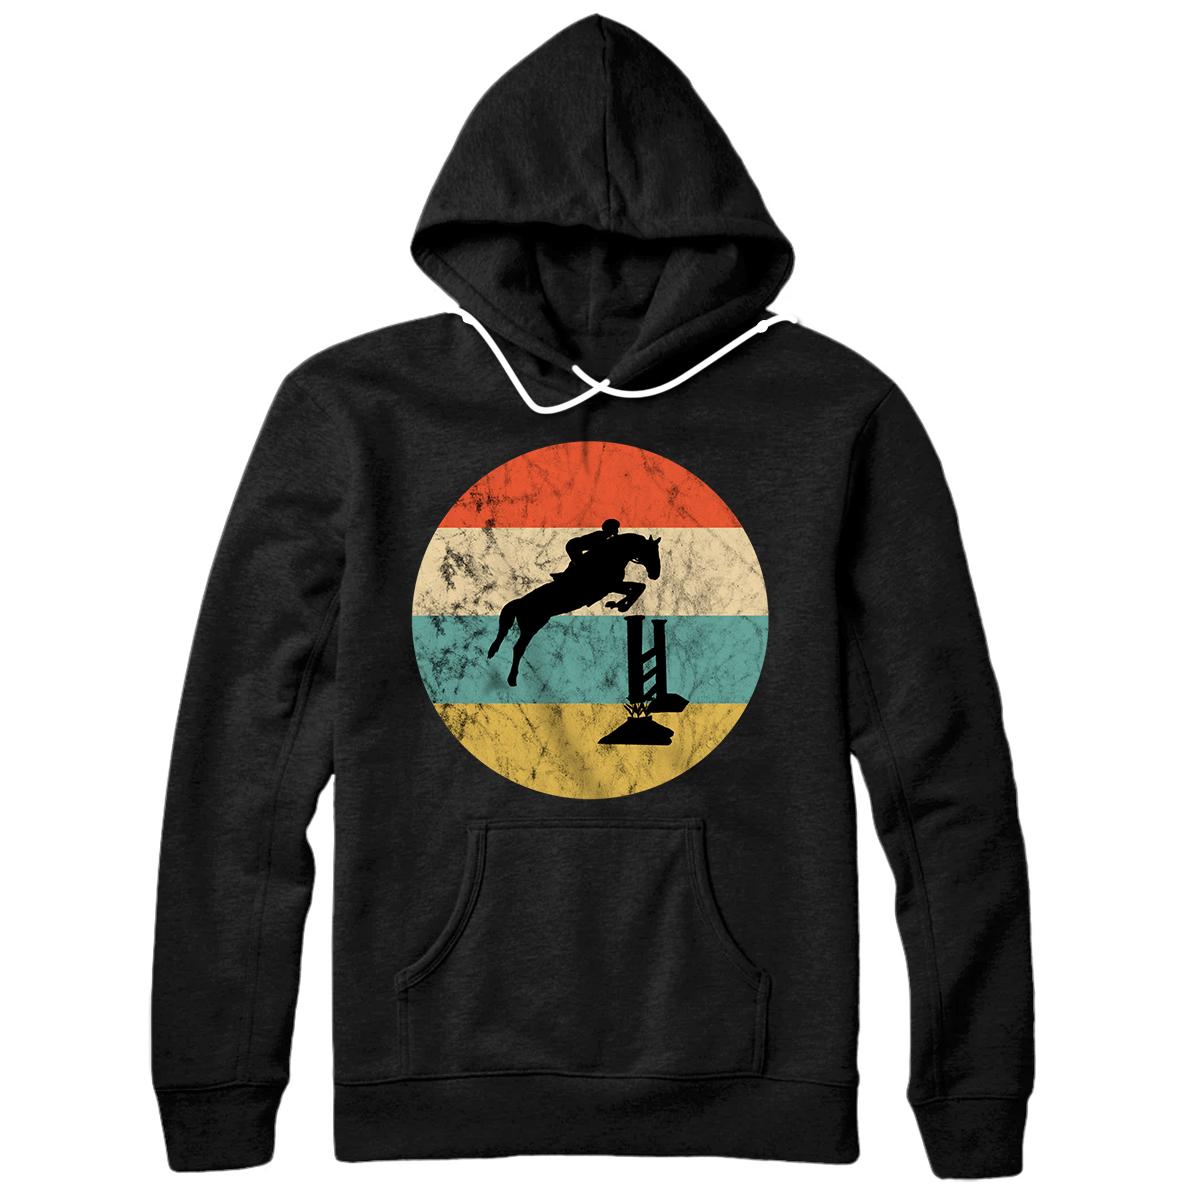 Personalized Equestrian Horse Riding Retro Vintage Sunset Show Jumping Pullover Hoodie